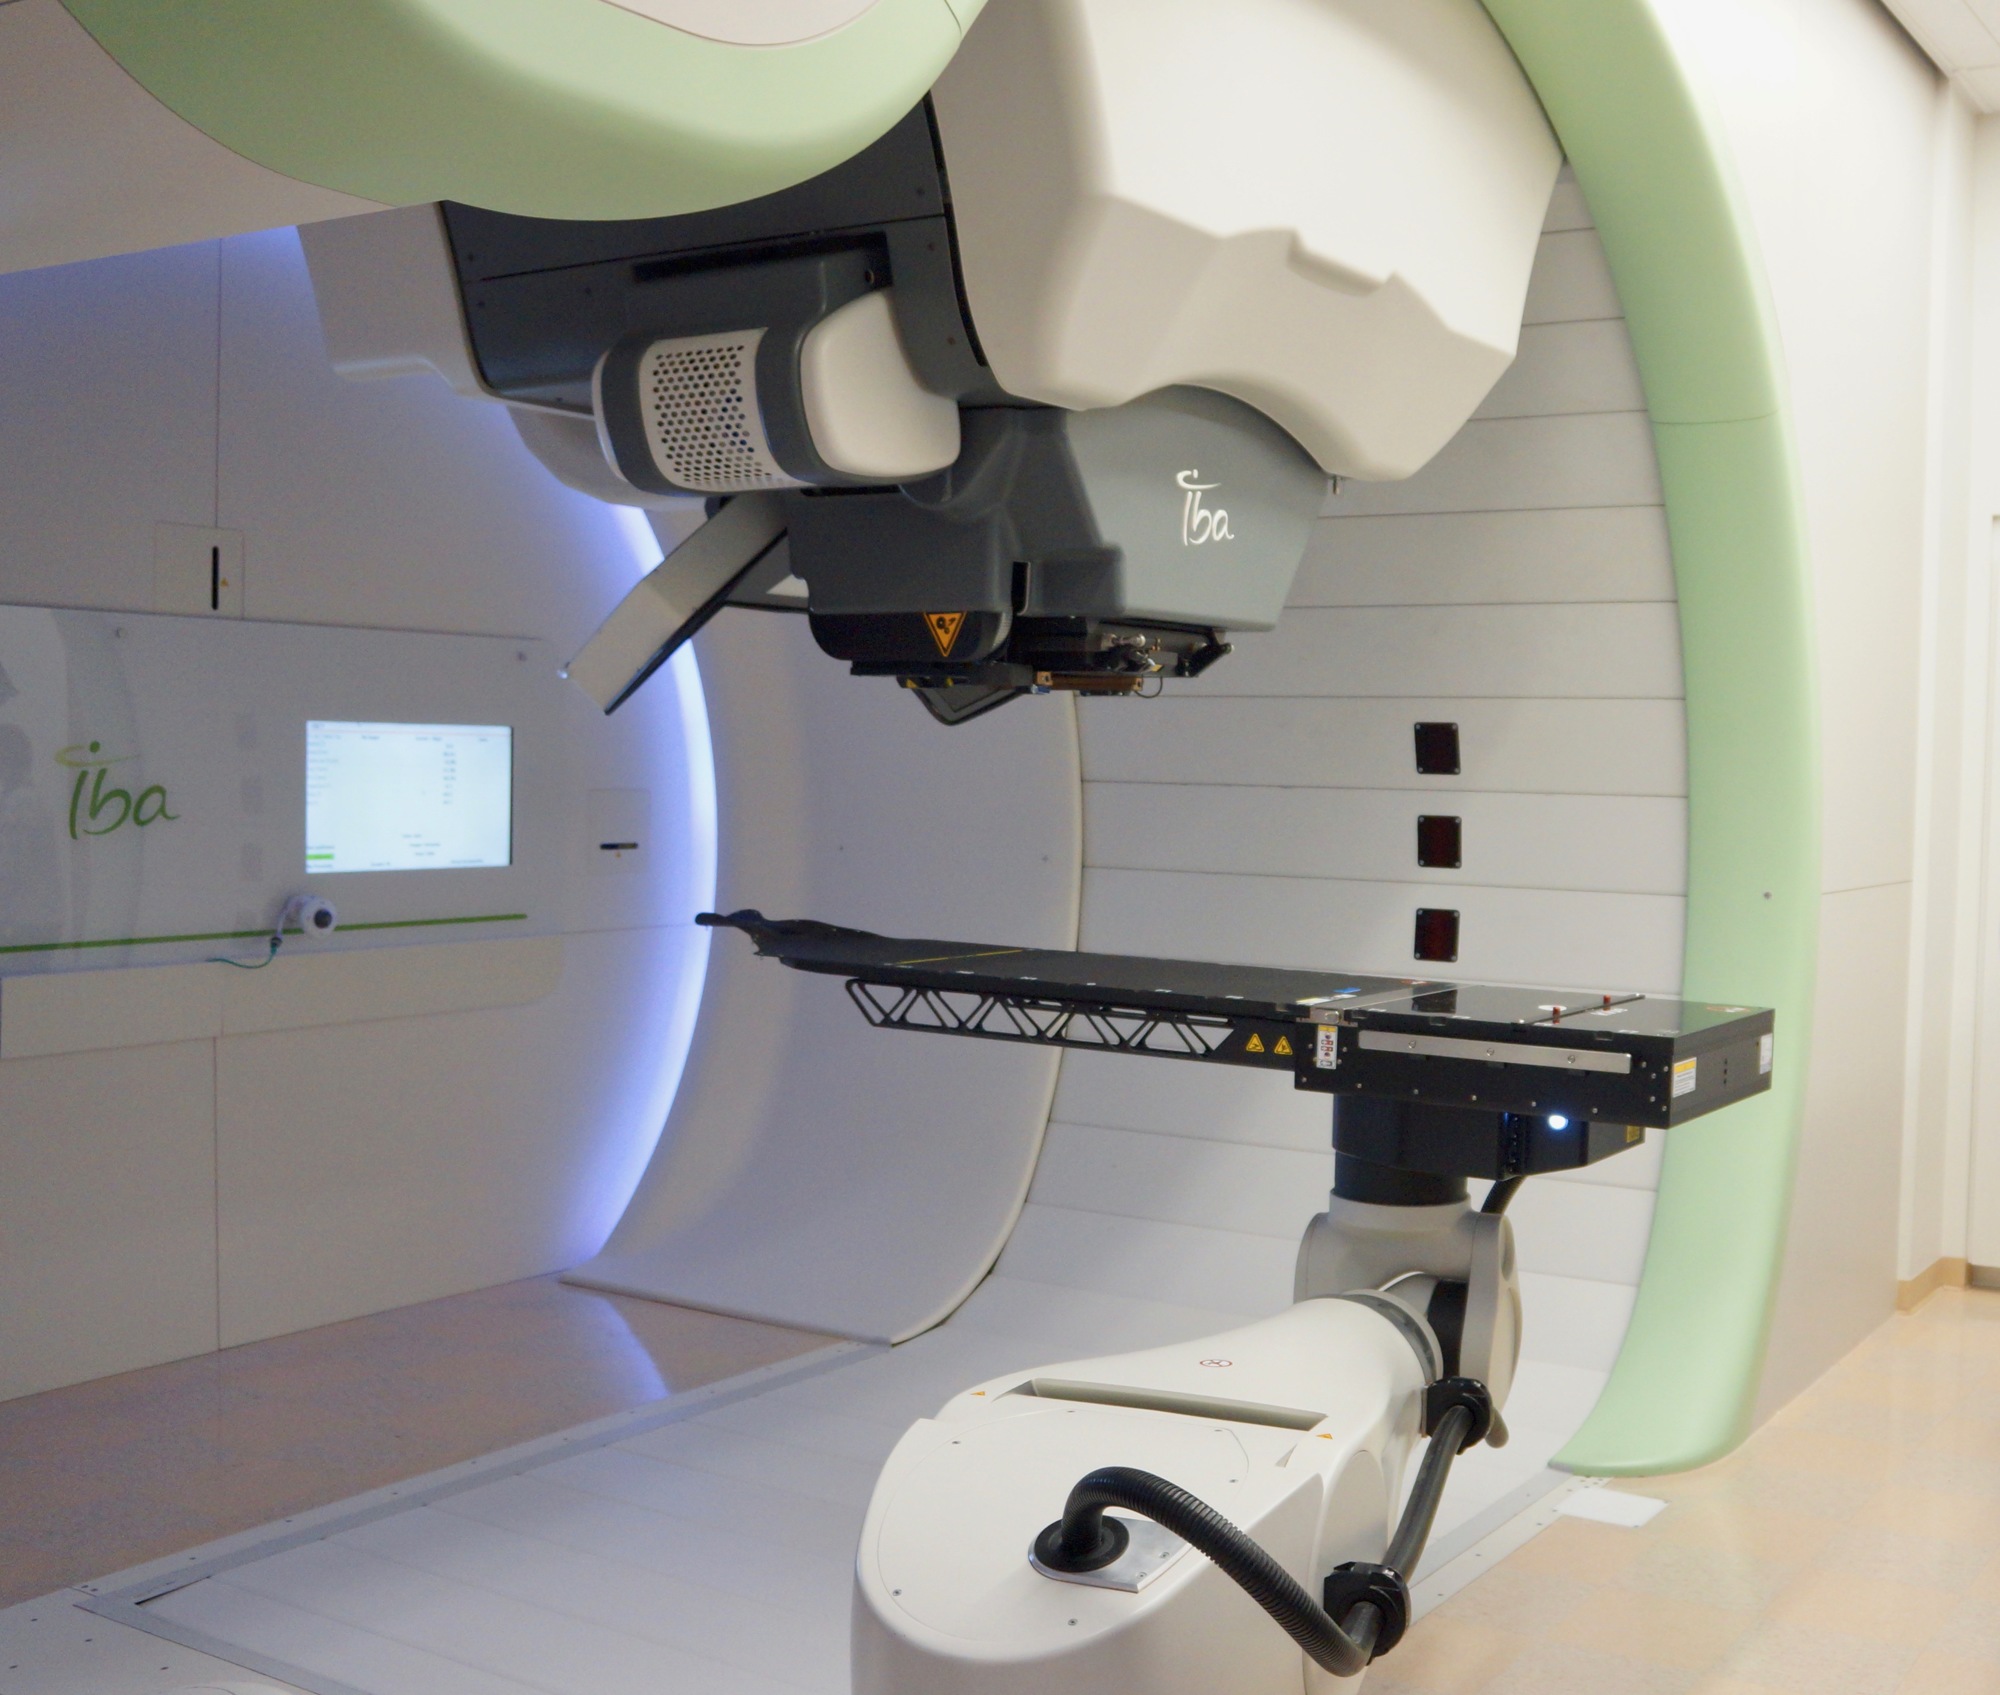 The ProteusONE system is part of a 10,000-square-foot, $39 million expansion of the UF Proton Therapy Institute.